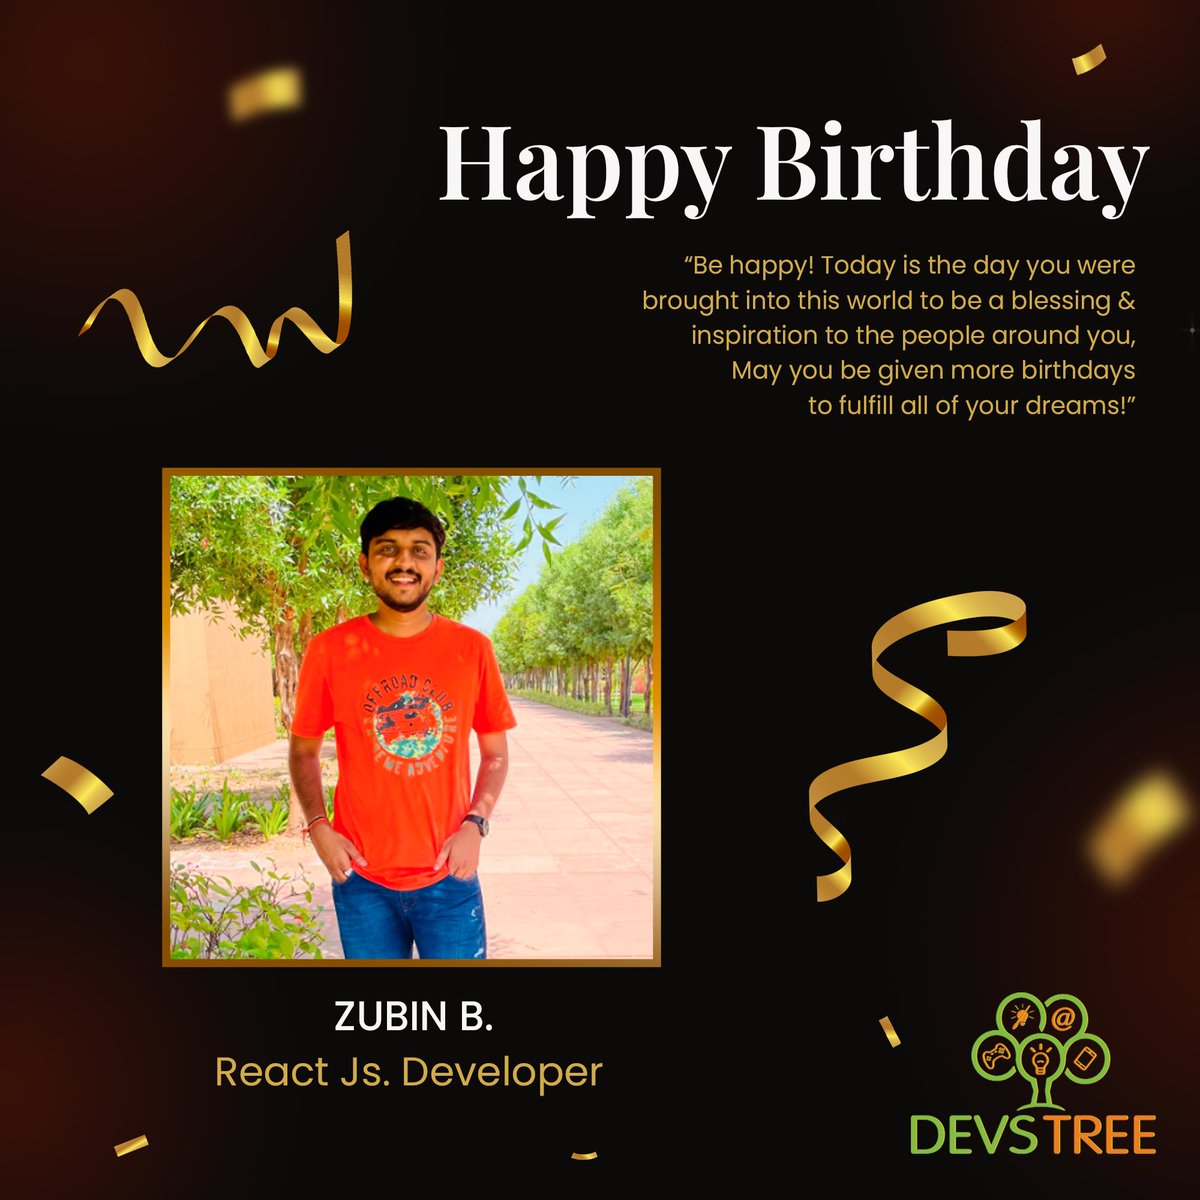 Wishing a very happy birthday to Jubin B.,

A talented React.js Developer! I'm so impressed with your work, and I can't wait to see what you do next. Keep up the great work!

#HappyBirthday #BirthdayWishes #CelebrationTime #PartyOn #MakeAWish #employeebirthday #devstree #india